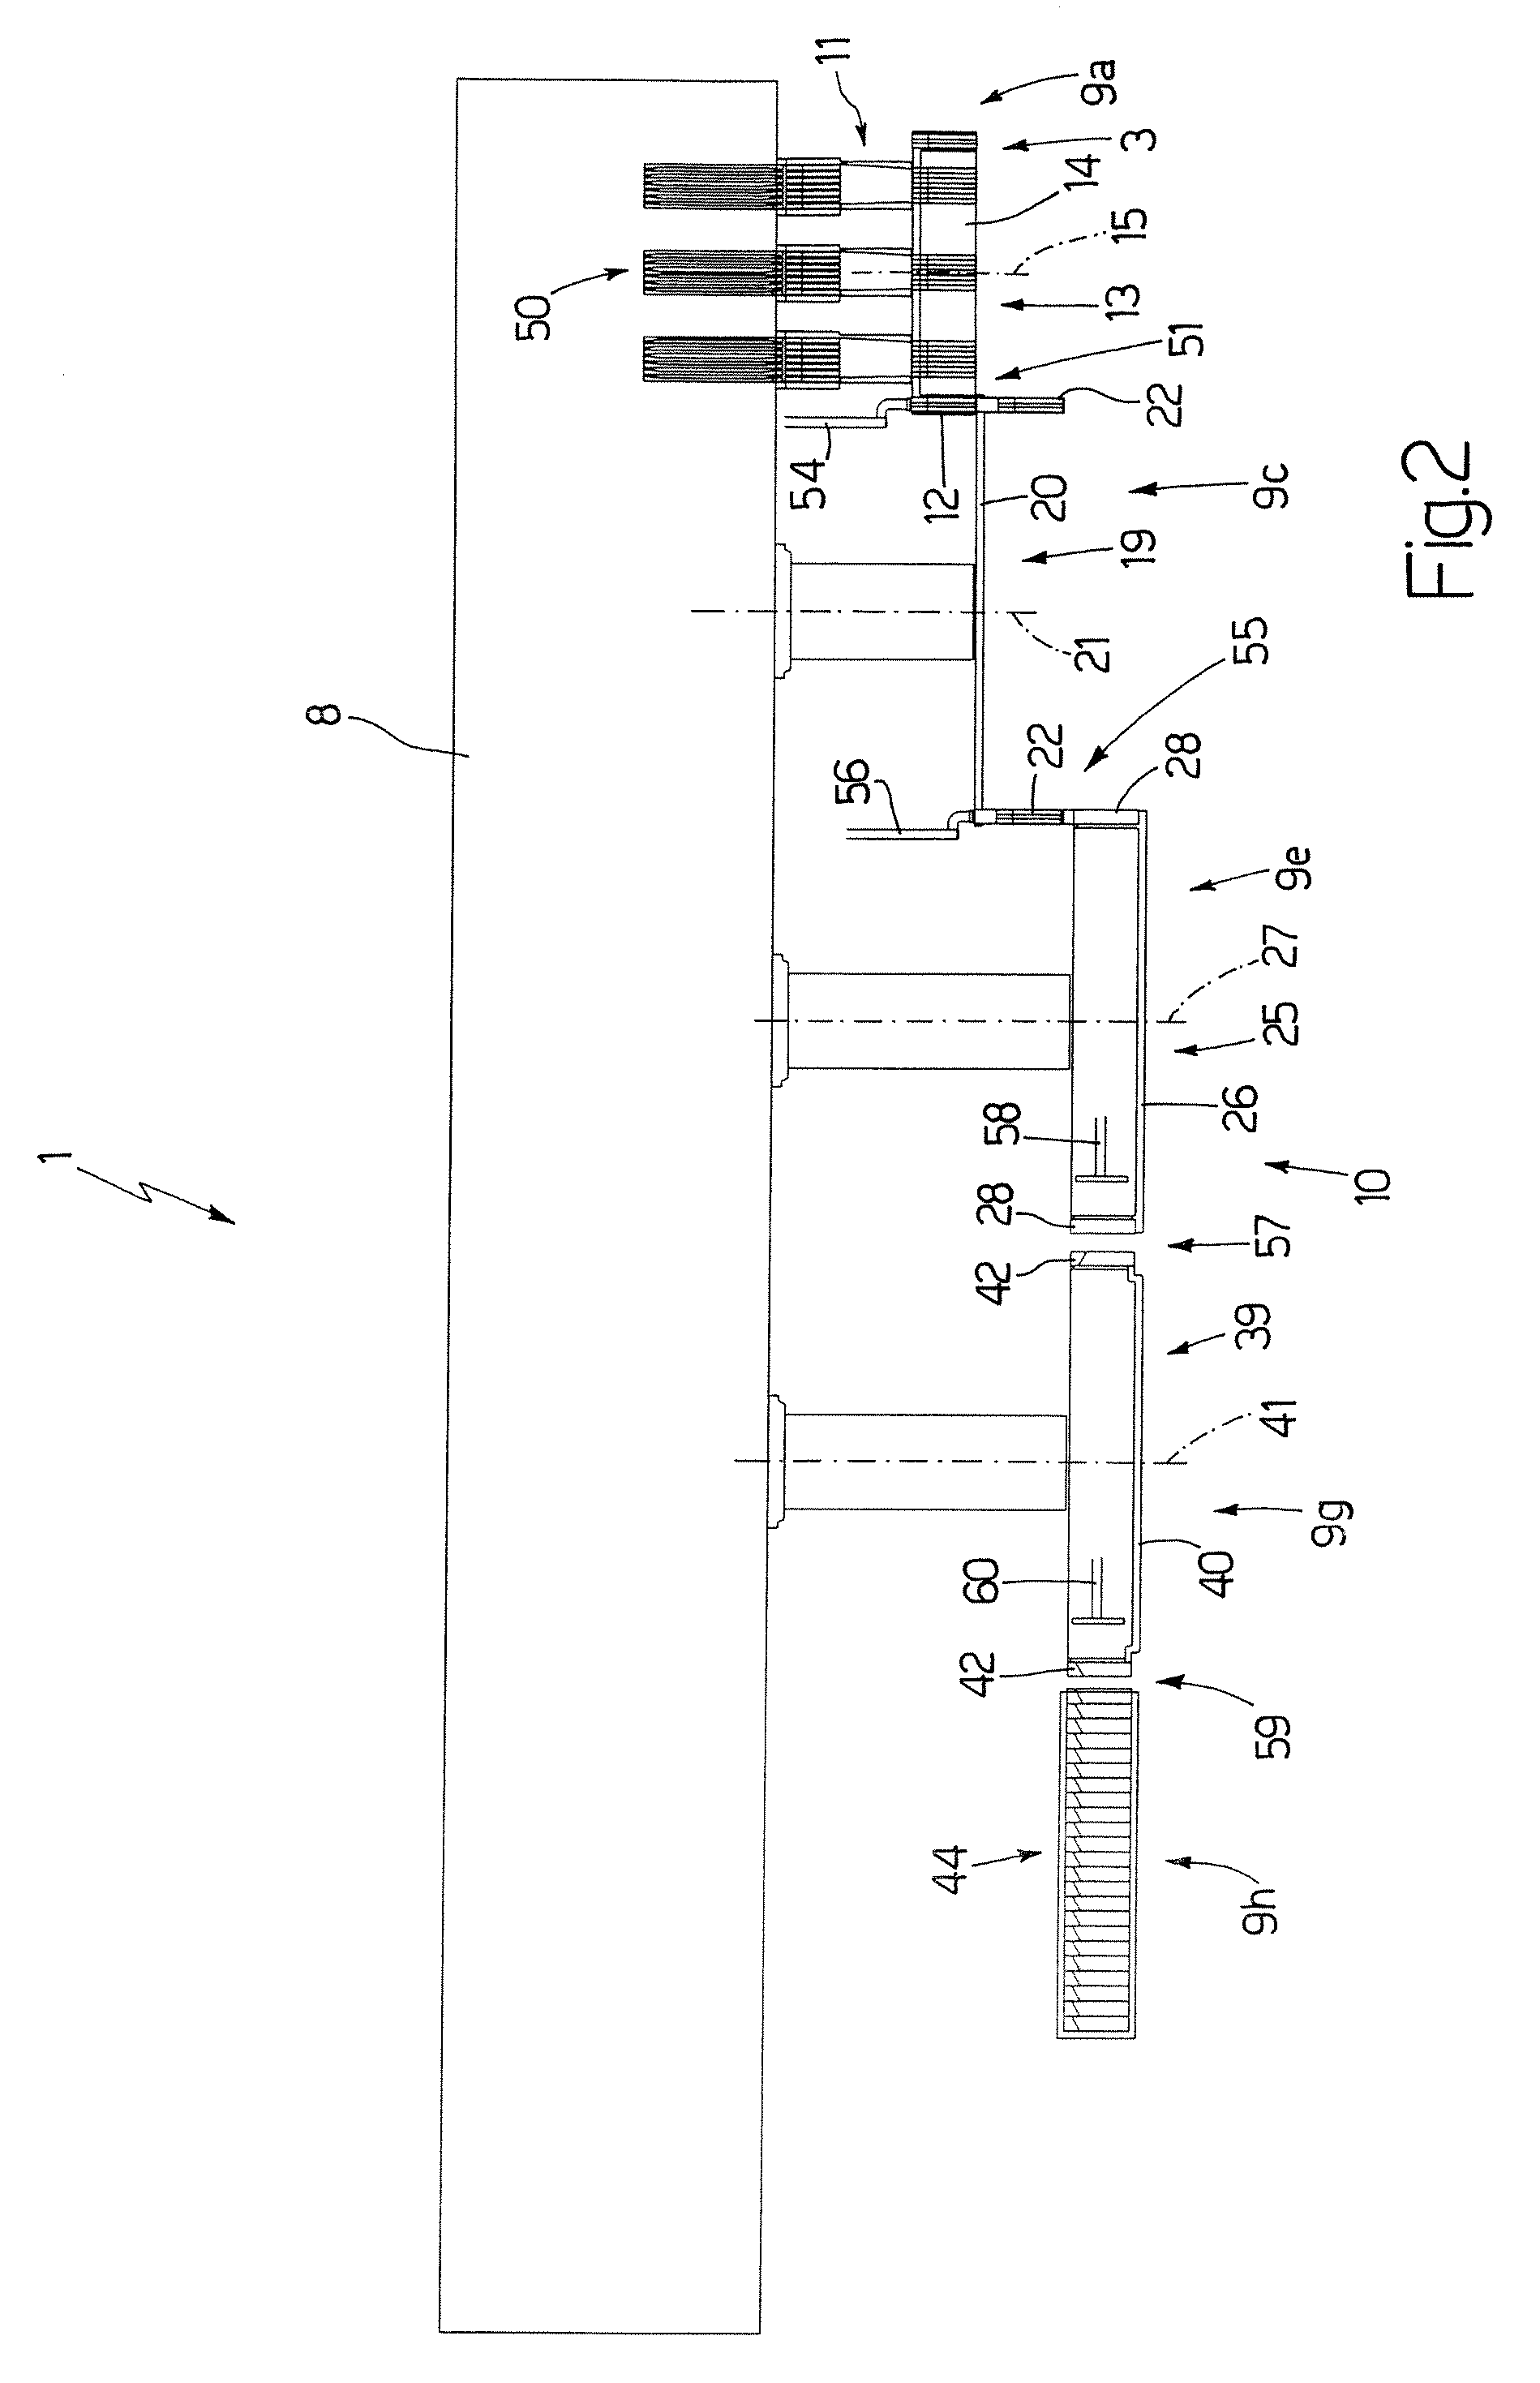 Method and machine for packing a product in at least one sheet of packing material